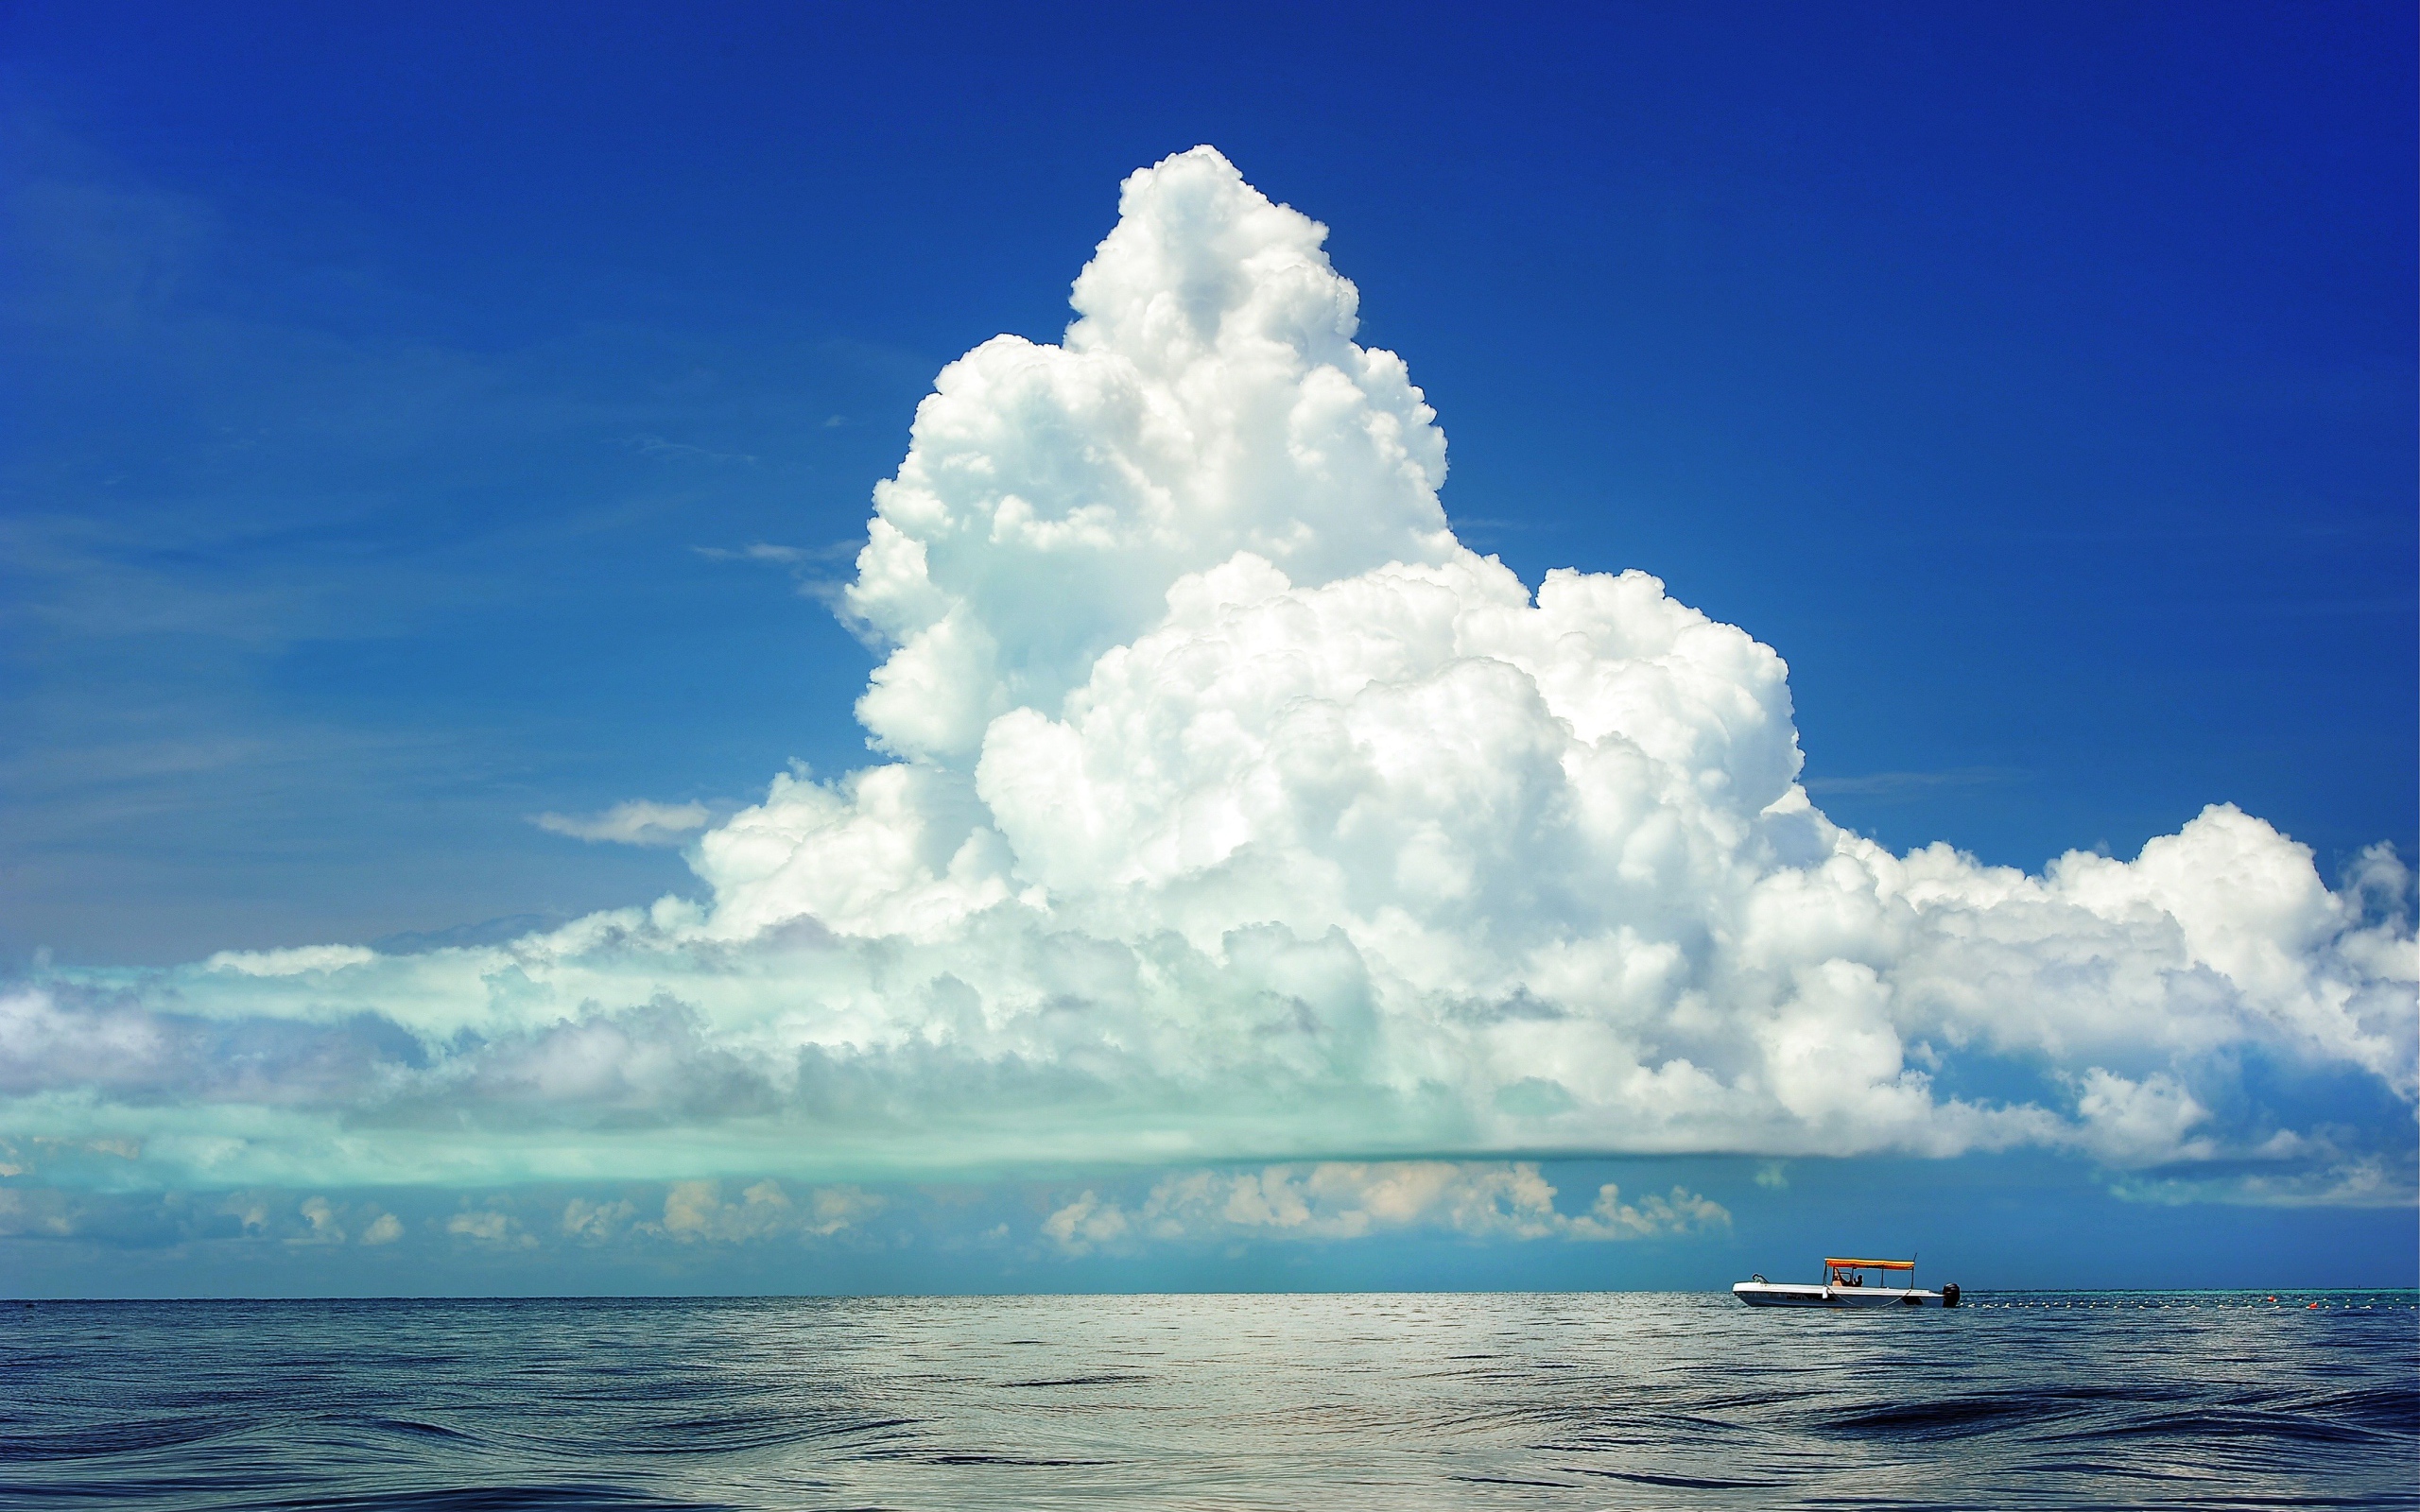 Large white cloud in the blue sky over the sea